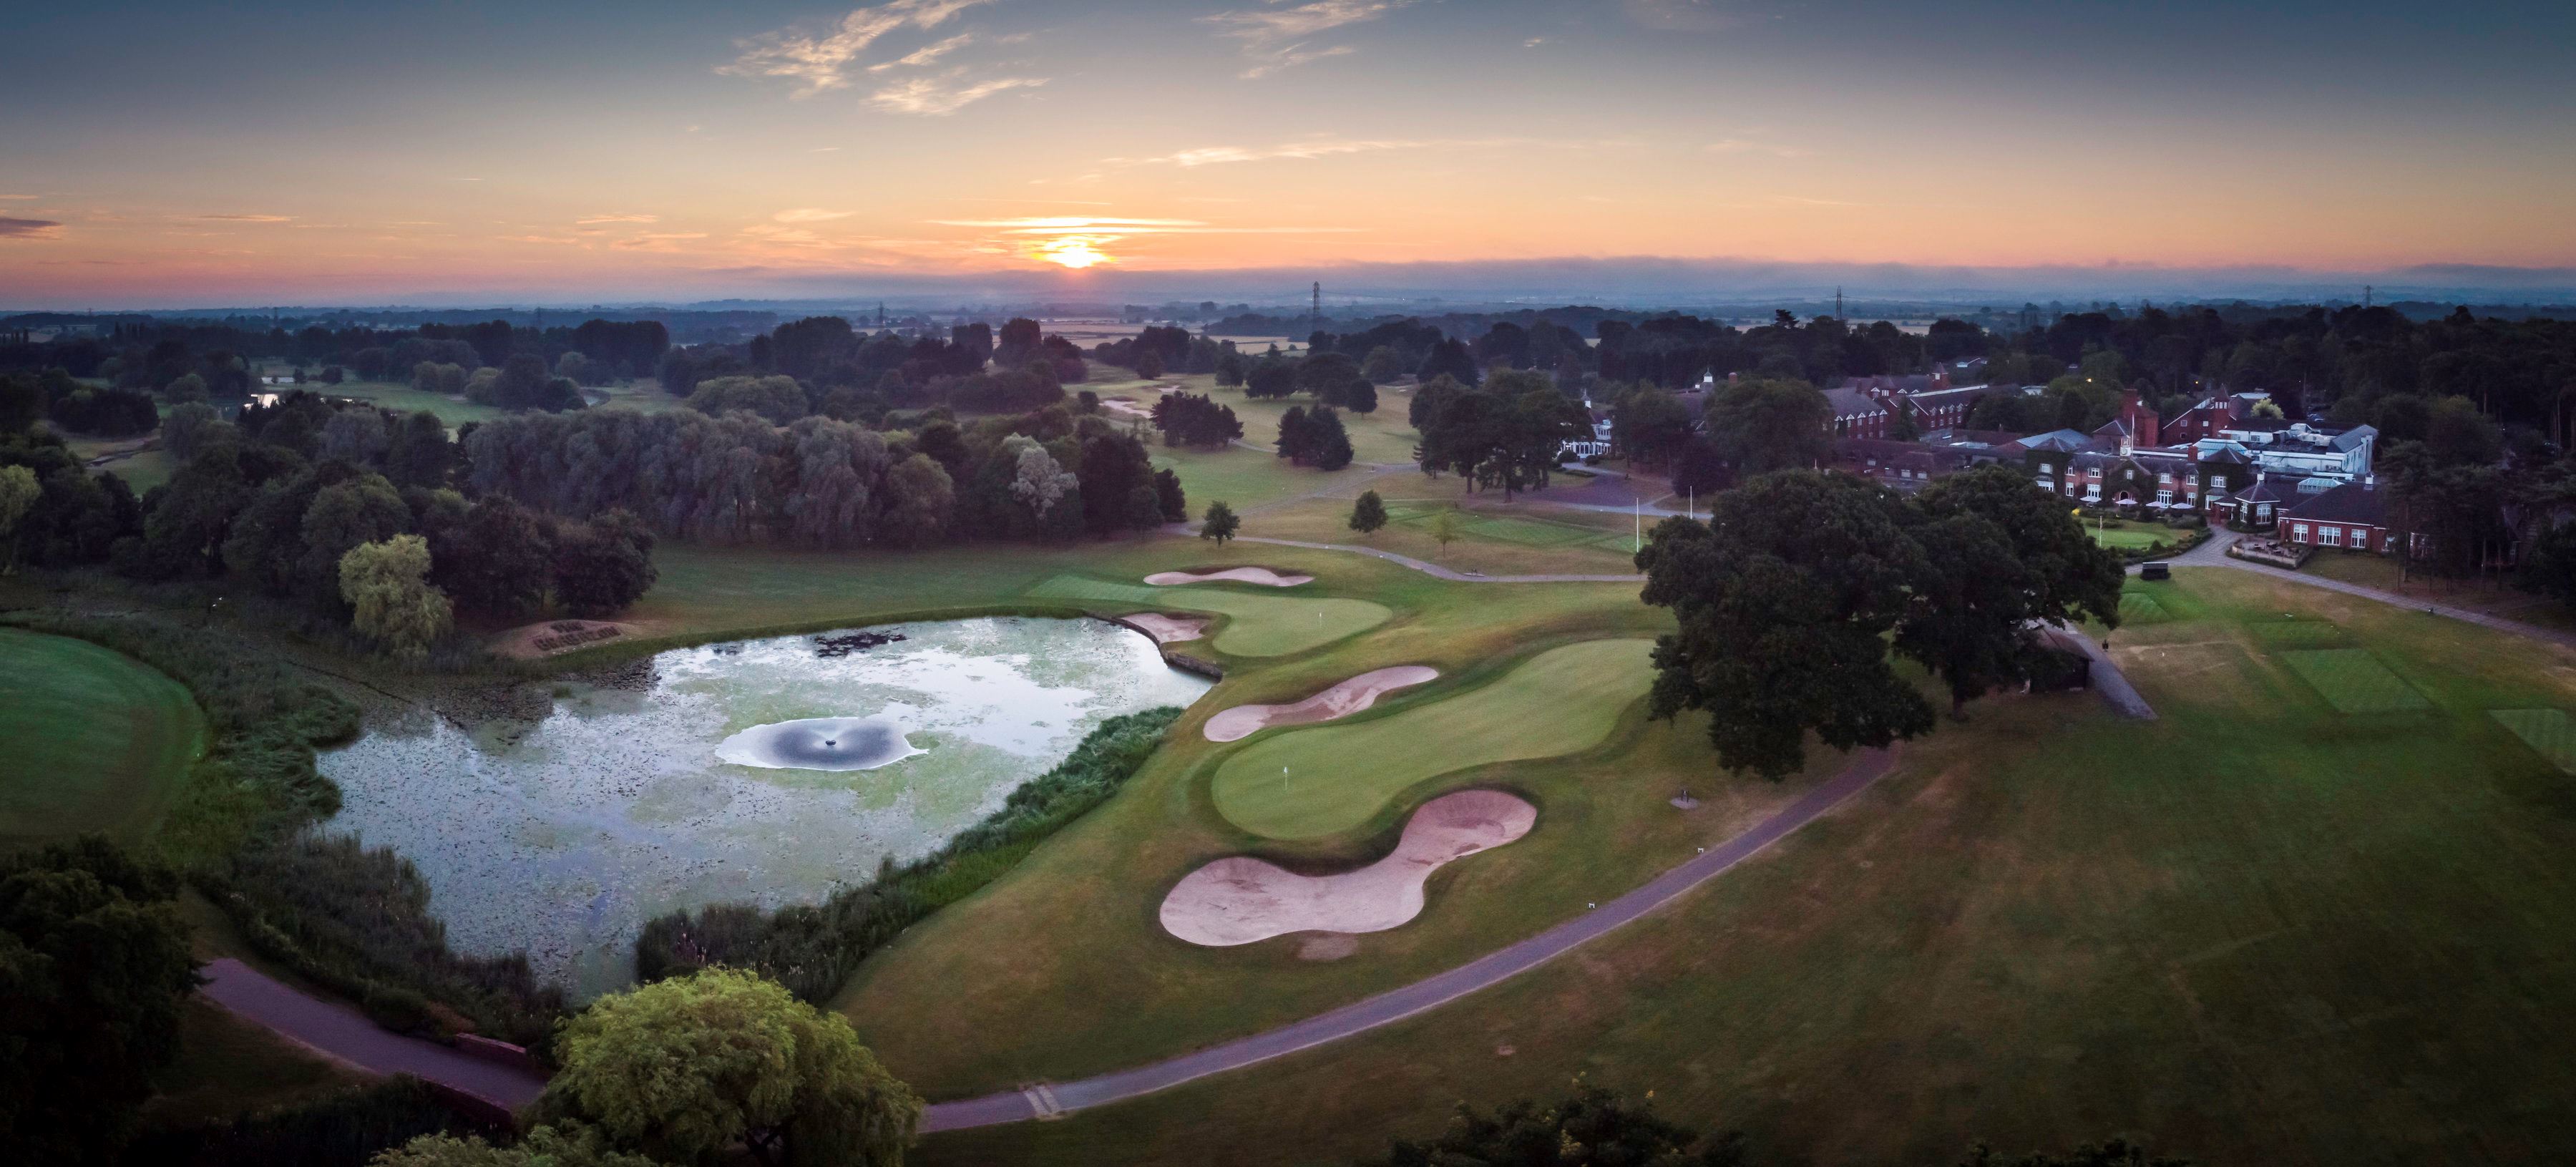 Birds eye view of golf course at sunset